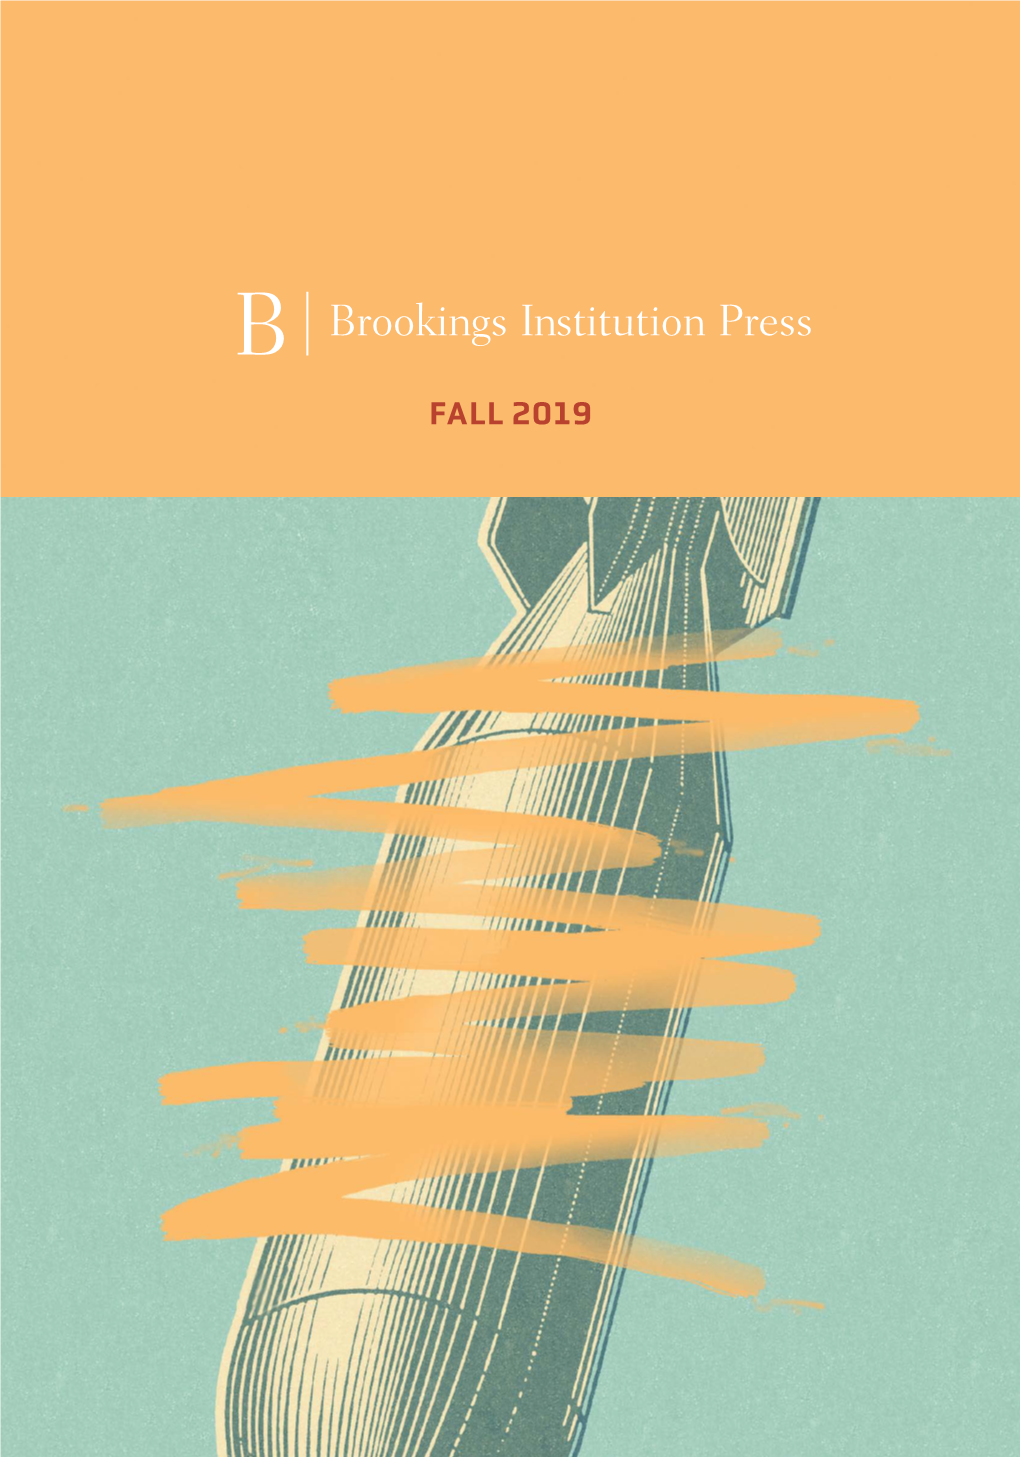 FALL 2019 Contents EXAMINATION COPIES the Brookings Institution Brookings Institution Press Press Publishes Many Books Books 1 Ideal for Course Adoption